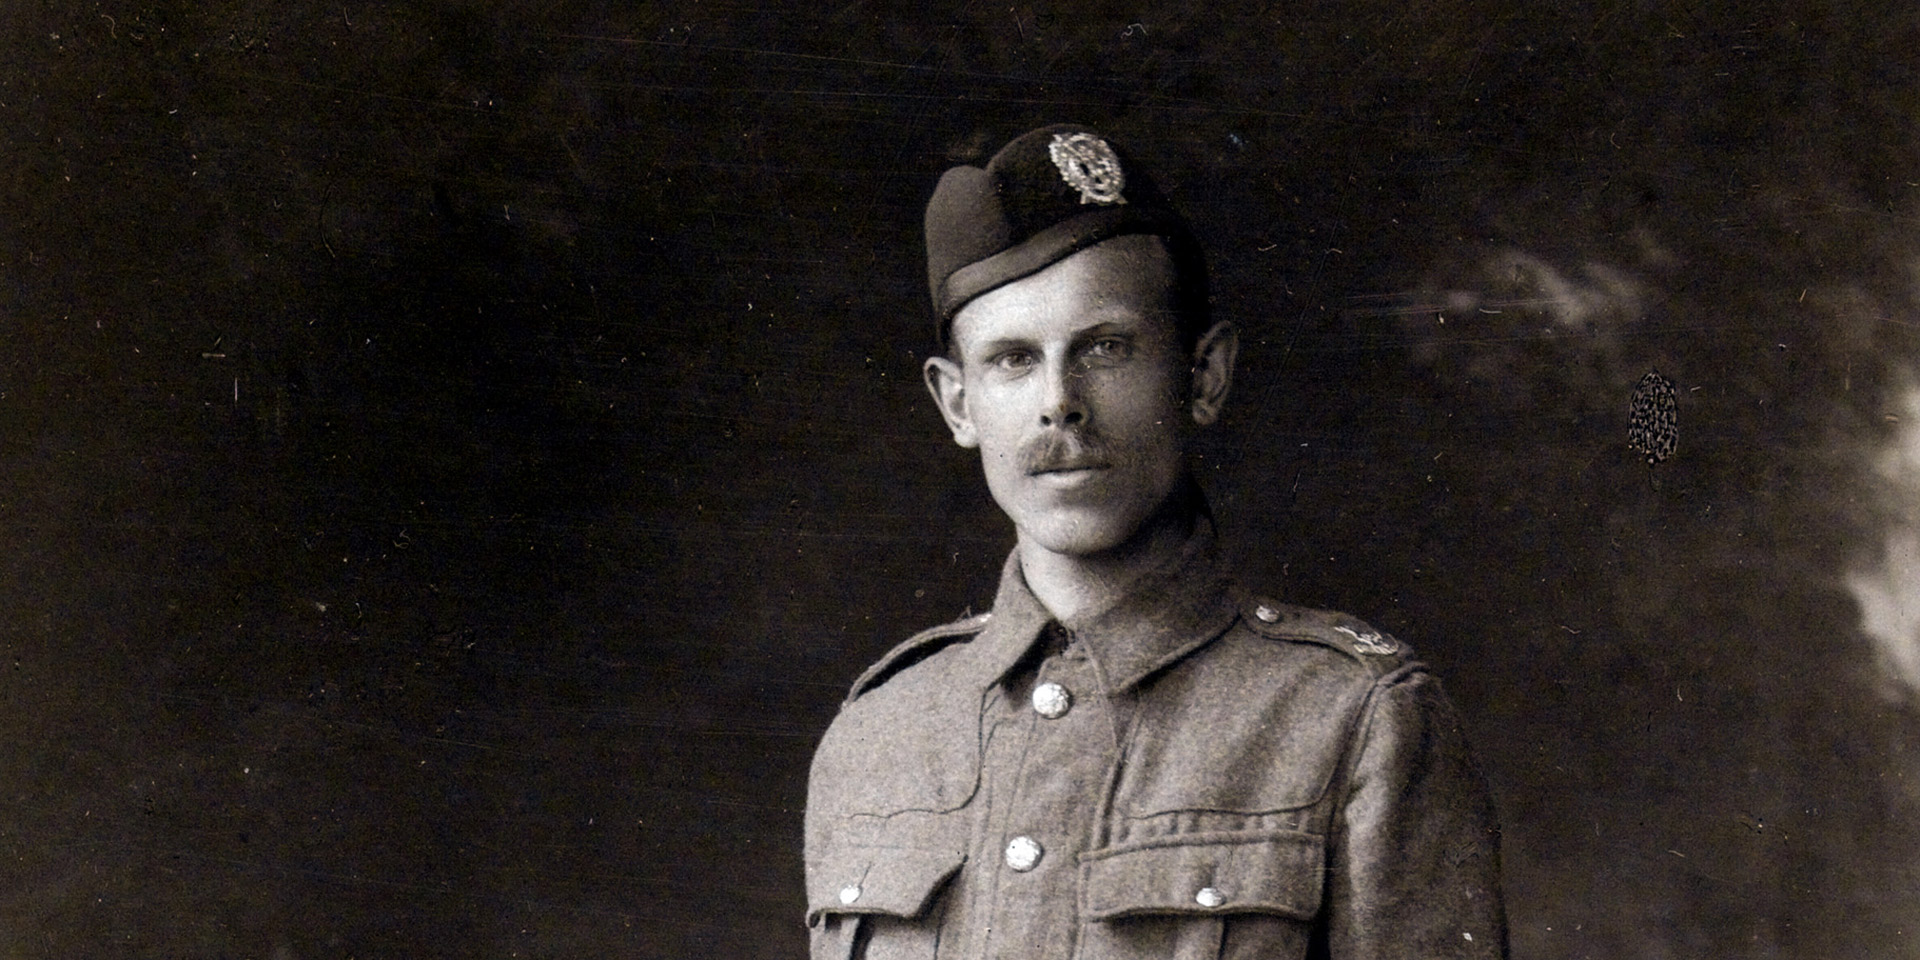 Private Percy Ottley, c1916